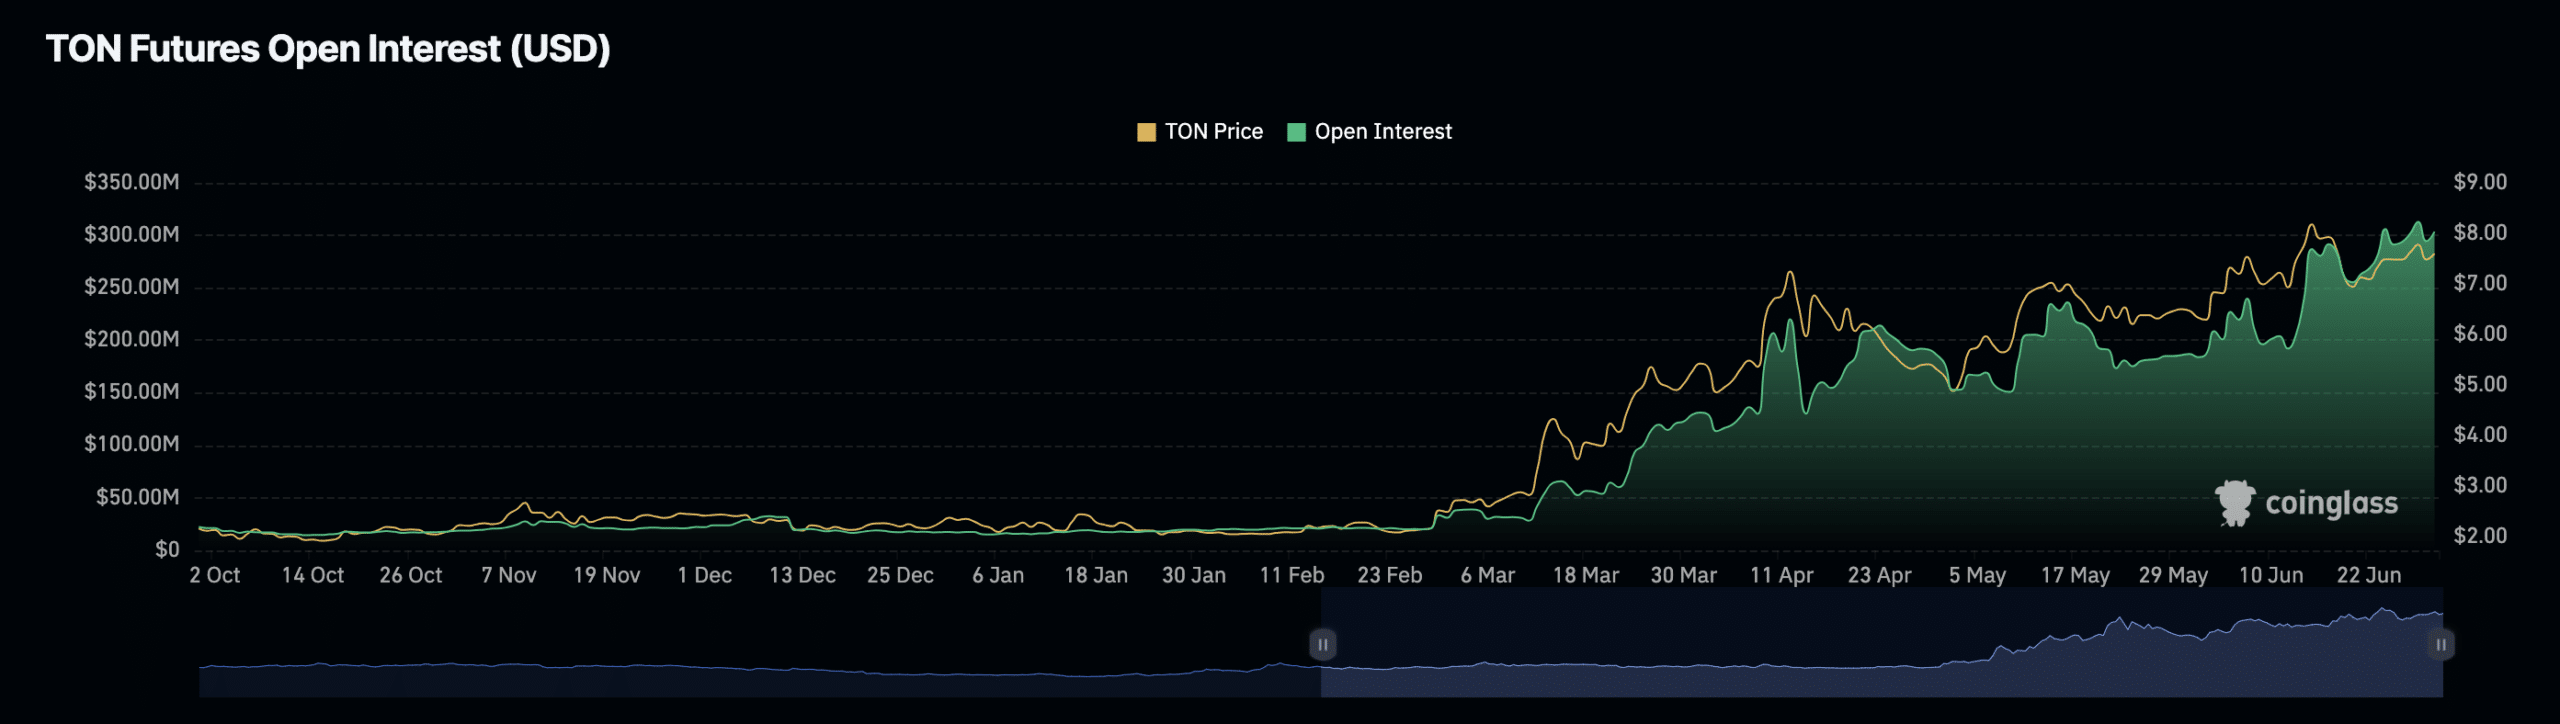 Toncoin speculative activity increases